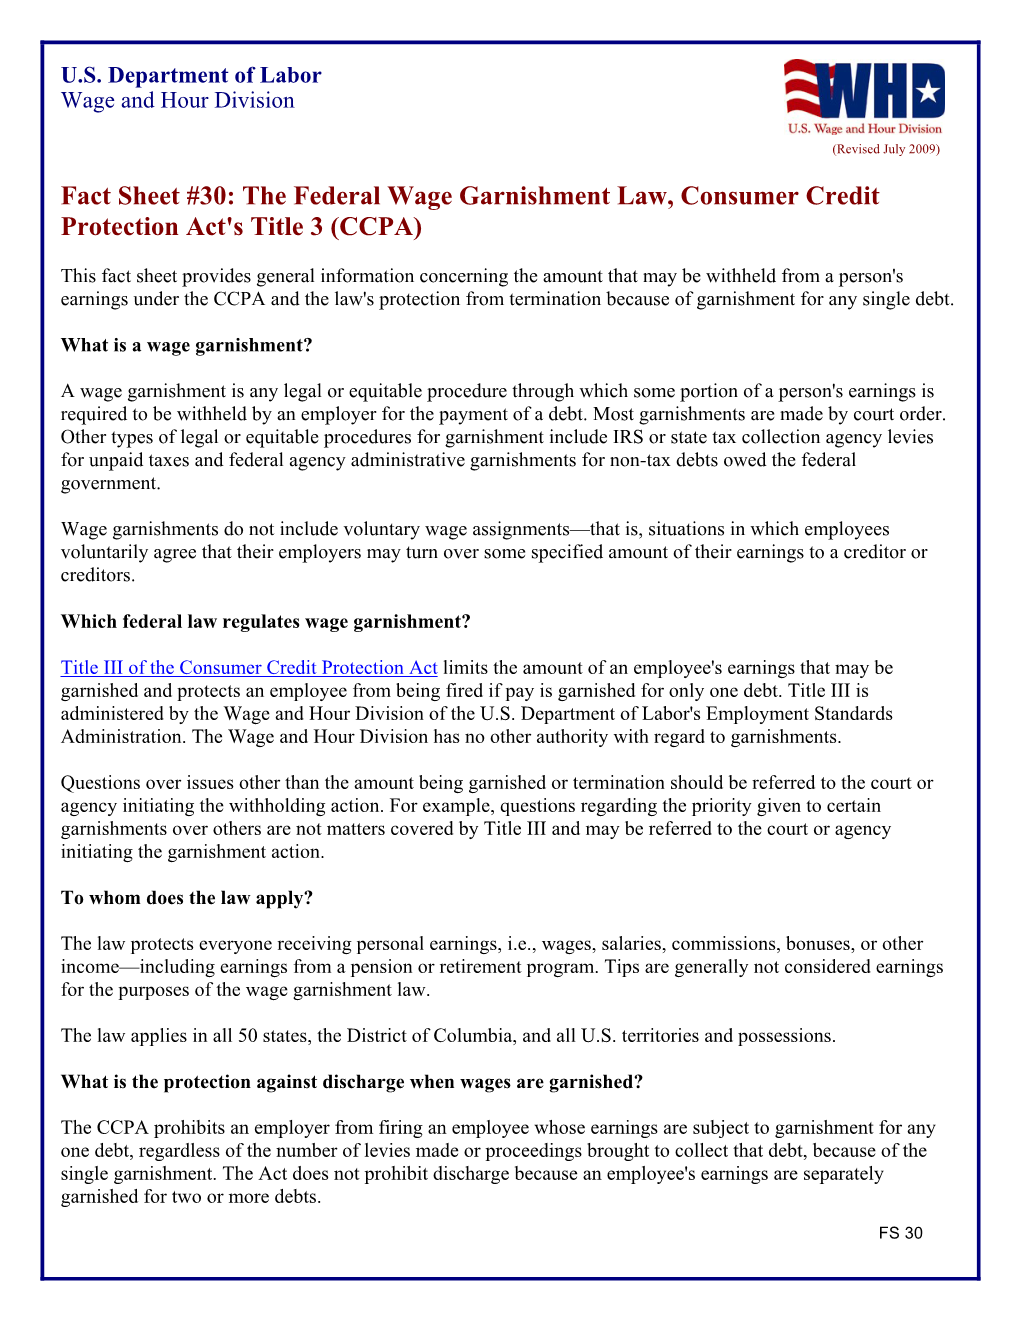 The Federal Wage Garnishment Law, Consumer Credit Protection Act's Title 3 (CCPA)